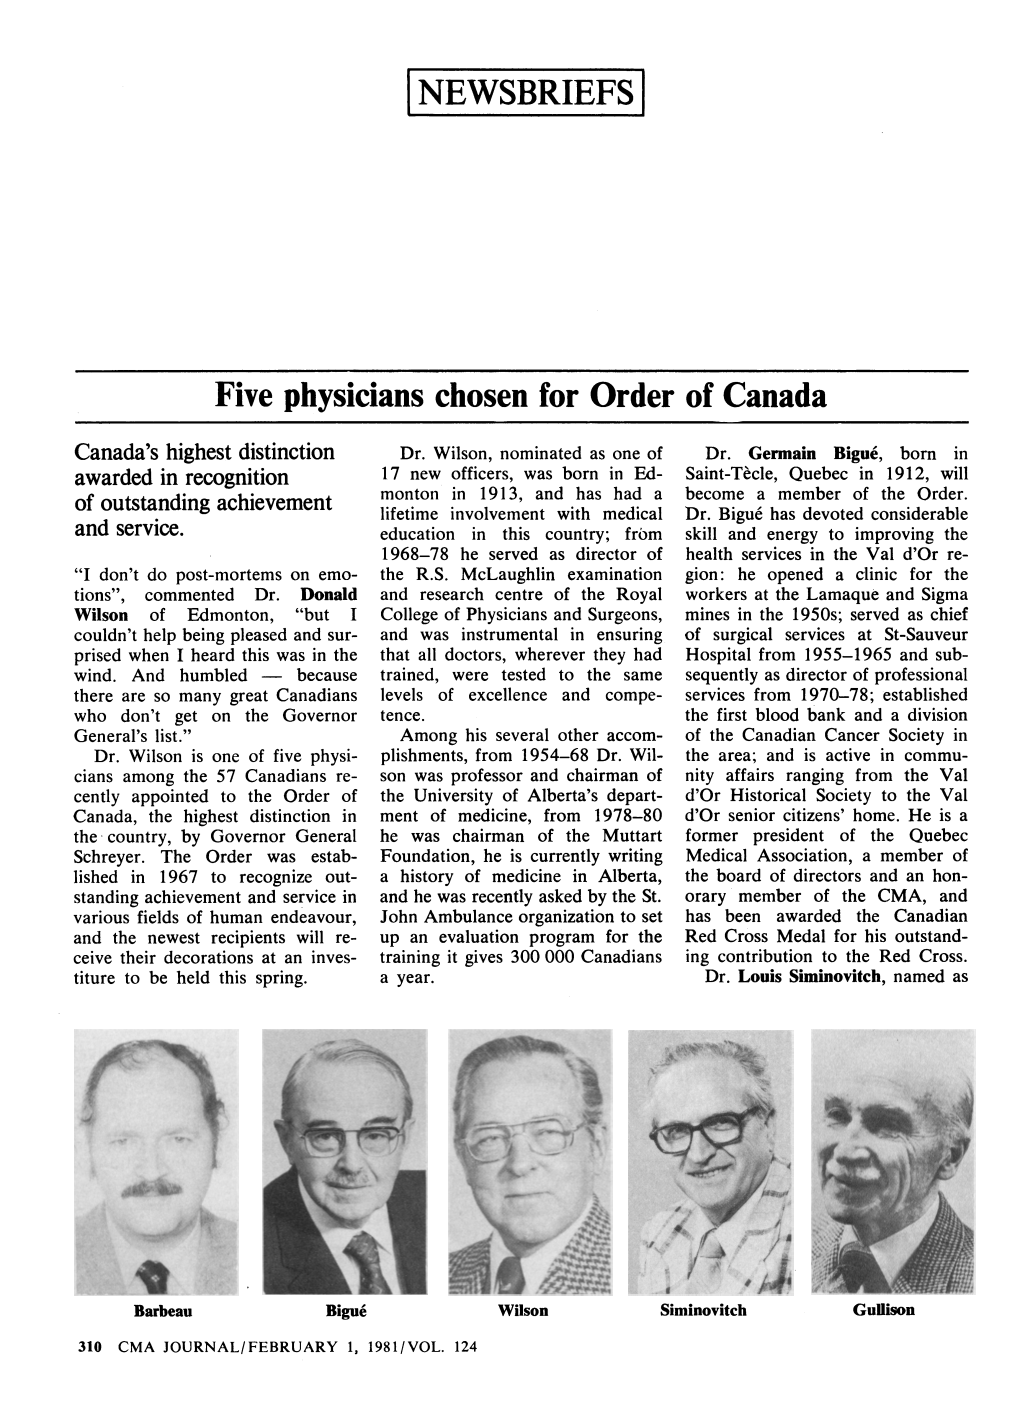 NEWSBRIEFS I Five Physicians Chosen for Order of Canada